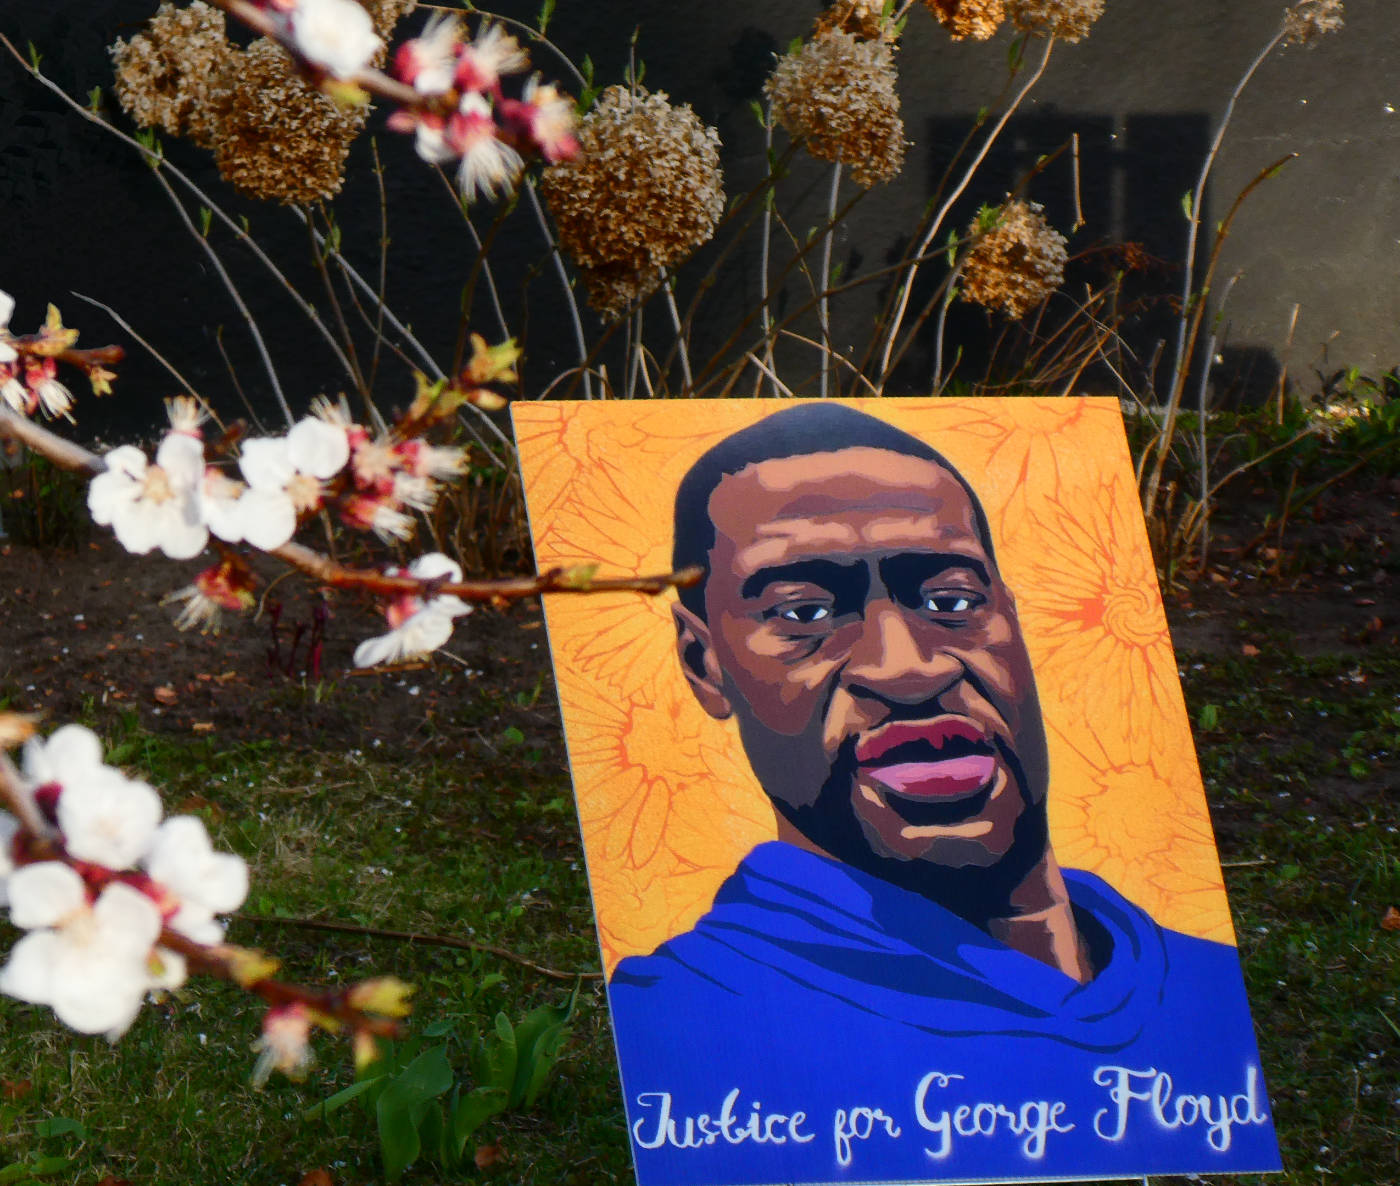 picture of a black man in a blue shirt on a yellow background with the inscription "Justice for George Floyd" propped up on a lawn with white and pink blossoms to the side in foreground